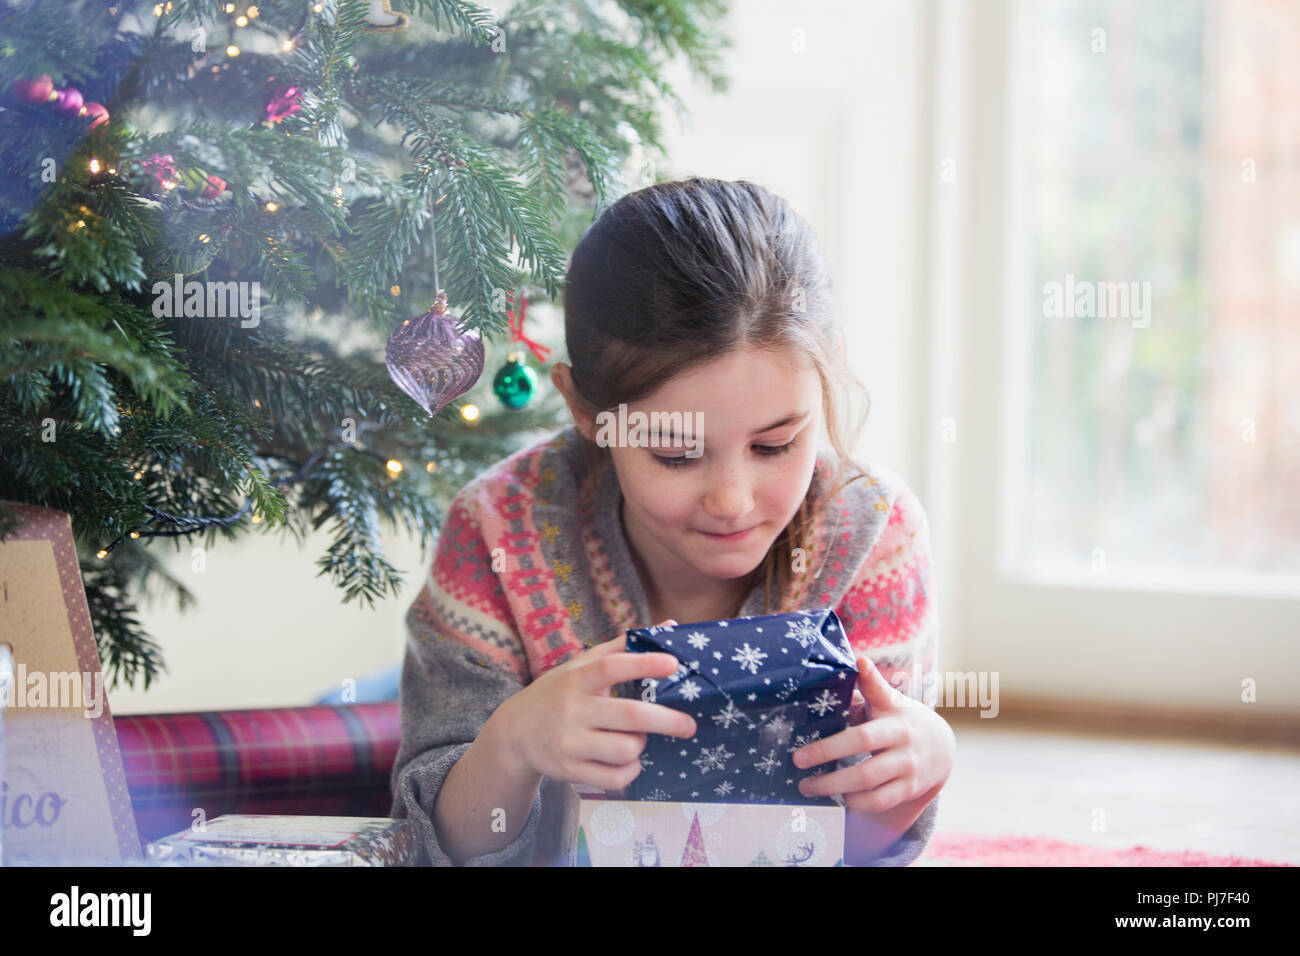 Curieux girl holding Christmas Gift Banque D'Images